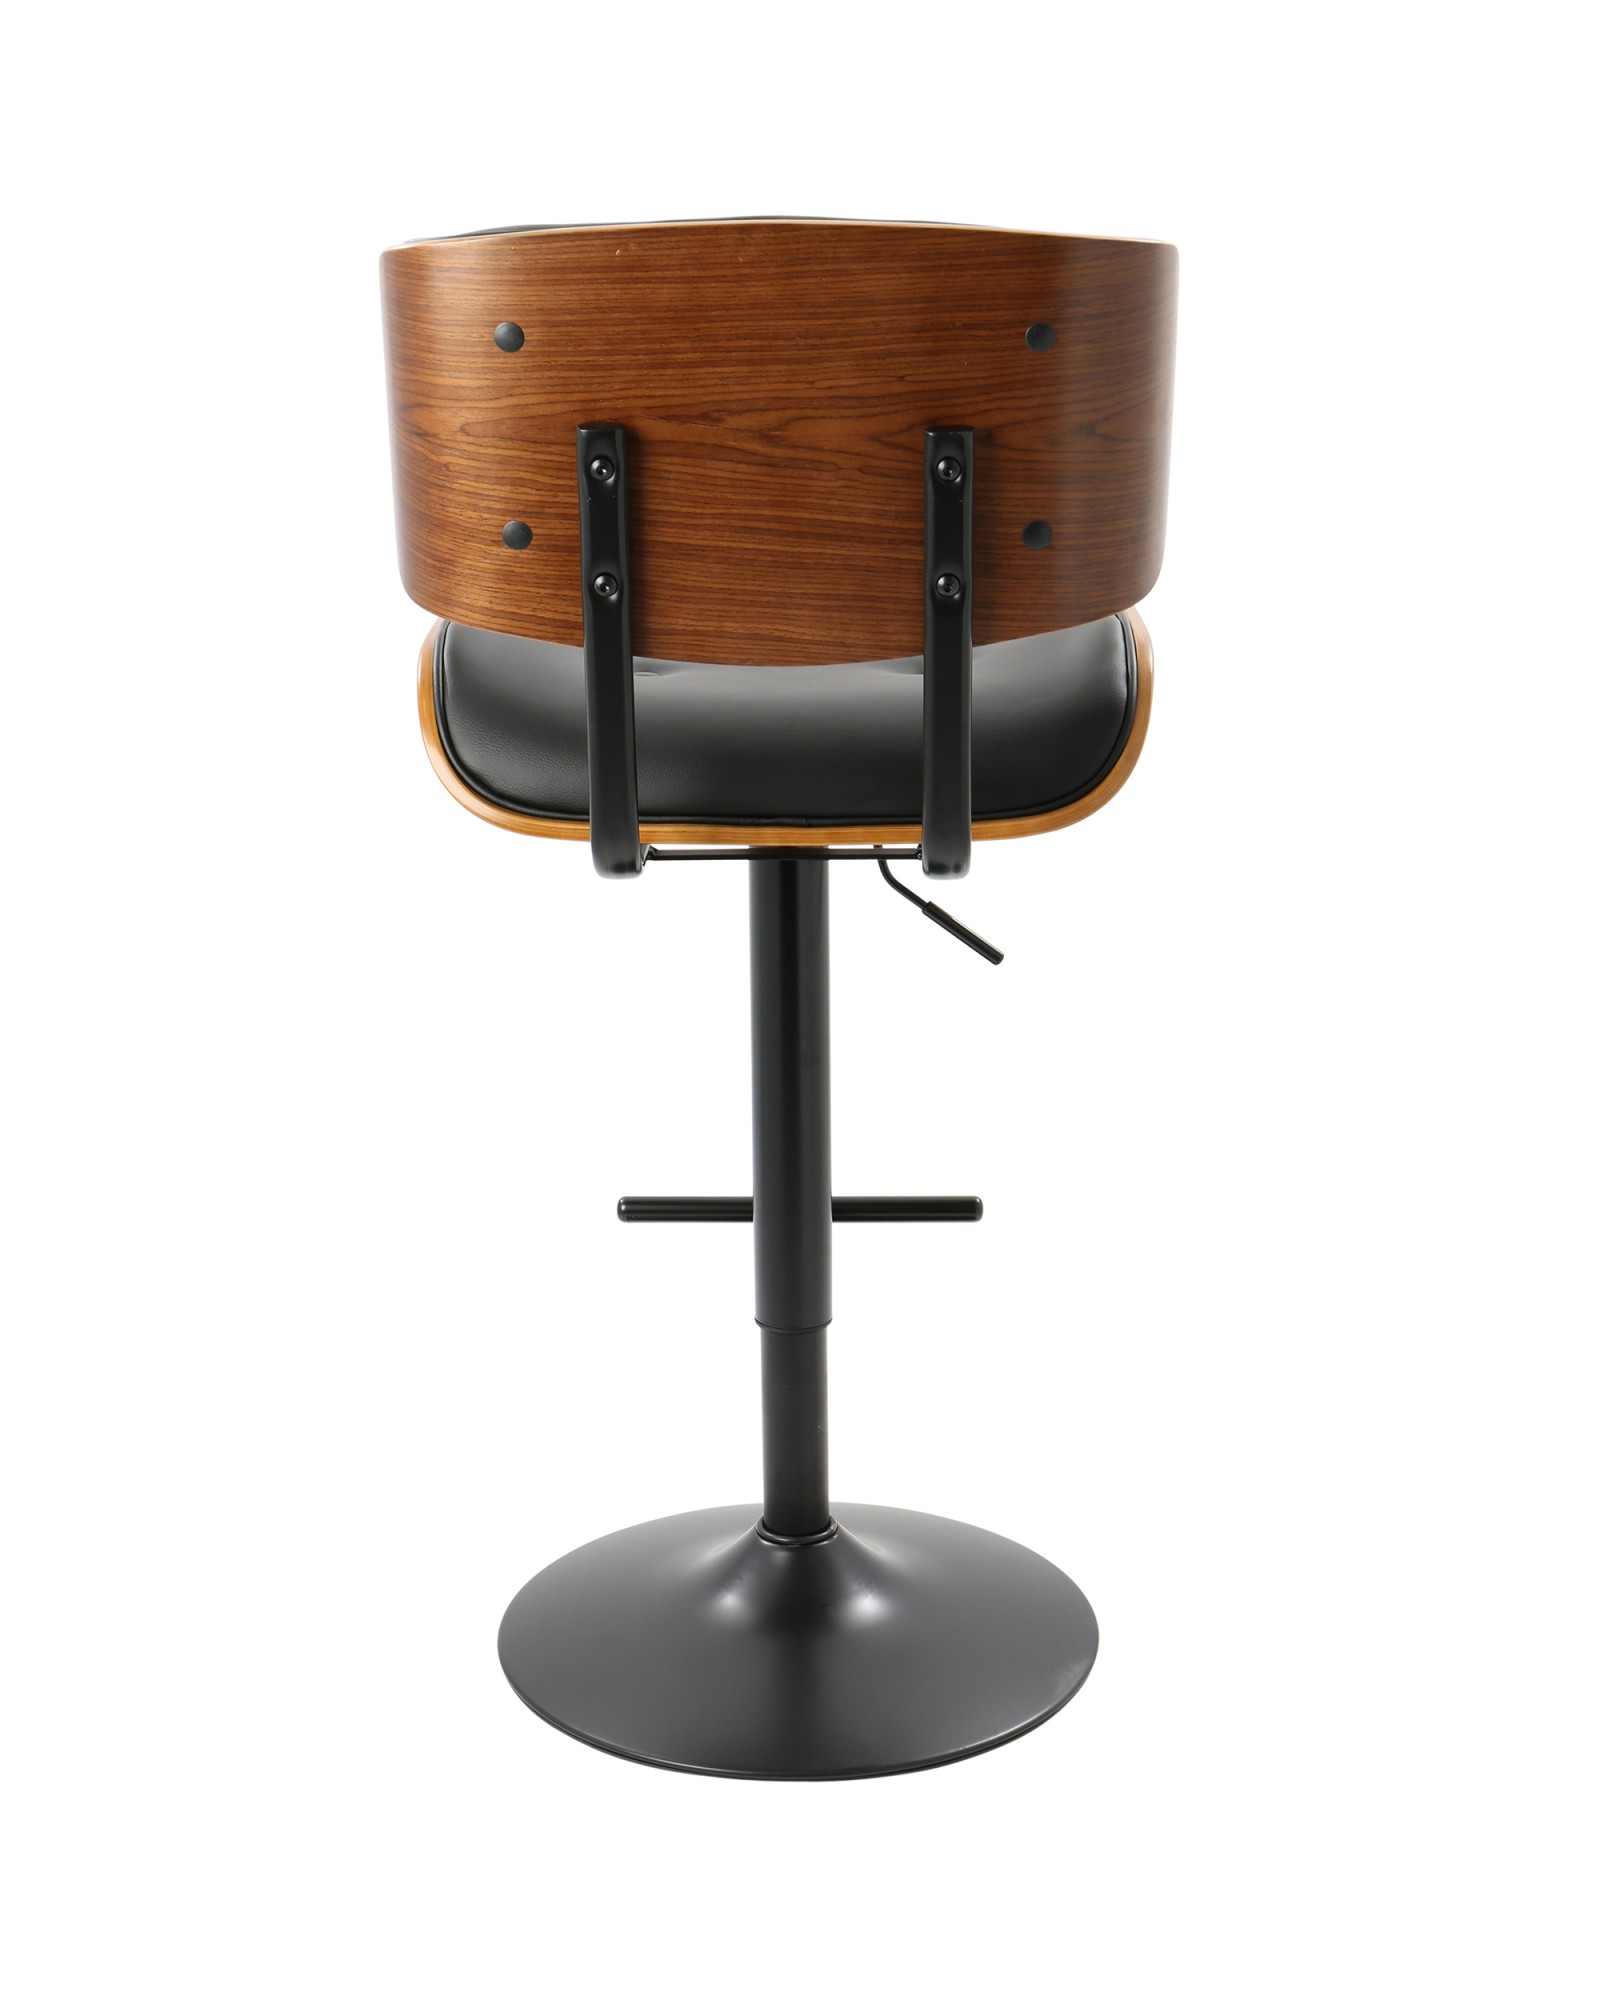 Lombardi Mid-Century Modern Adjustable Barstool in Walnut with Black Faux Leather